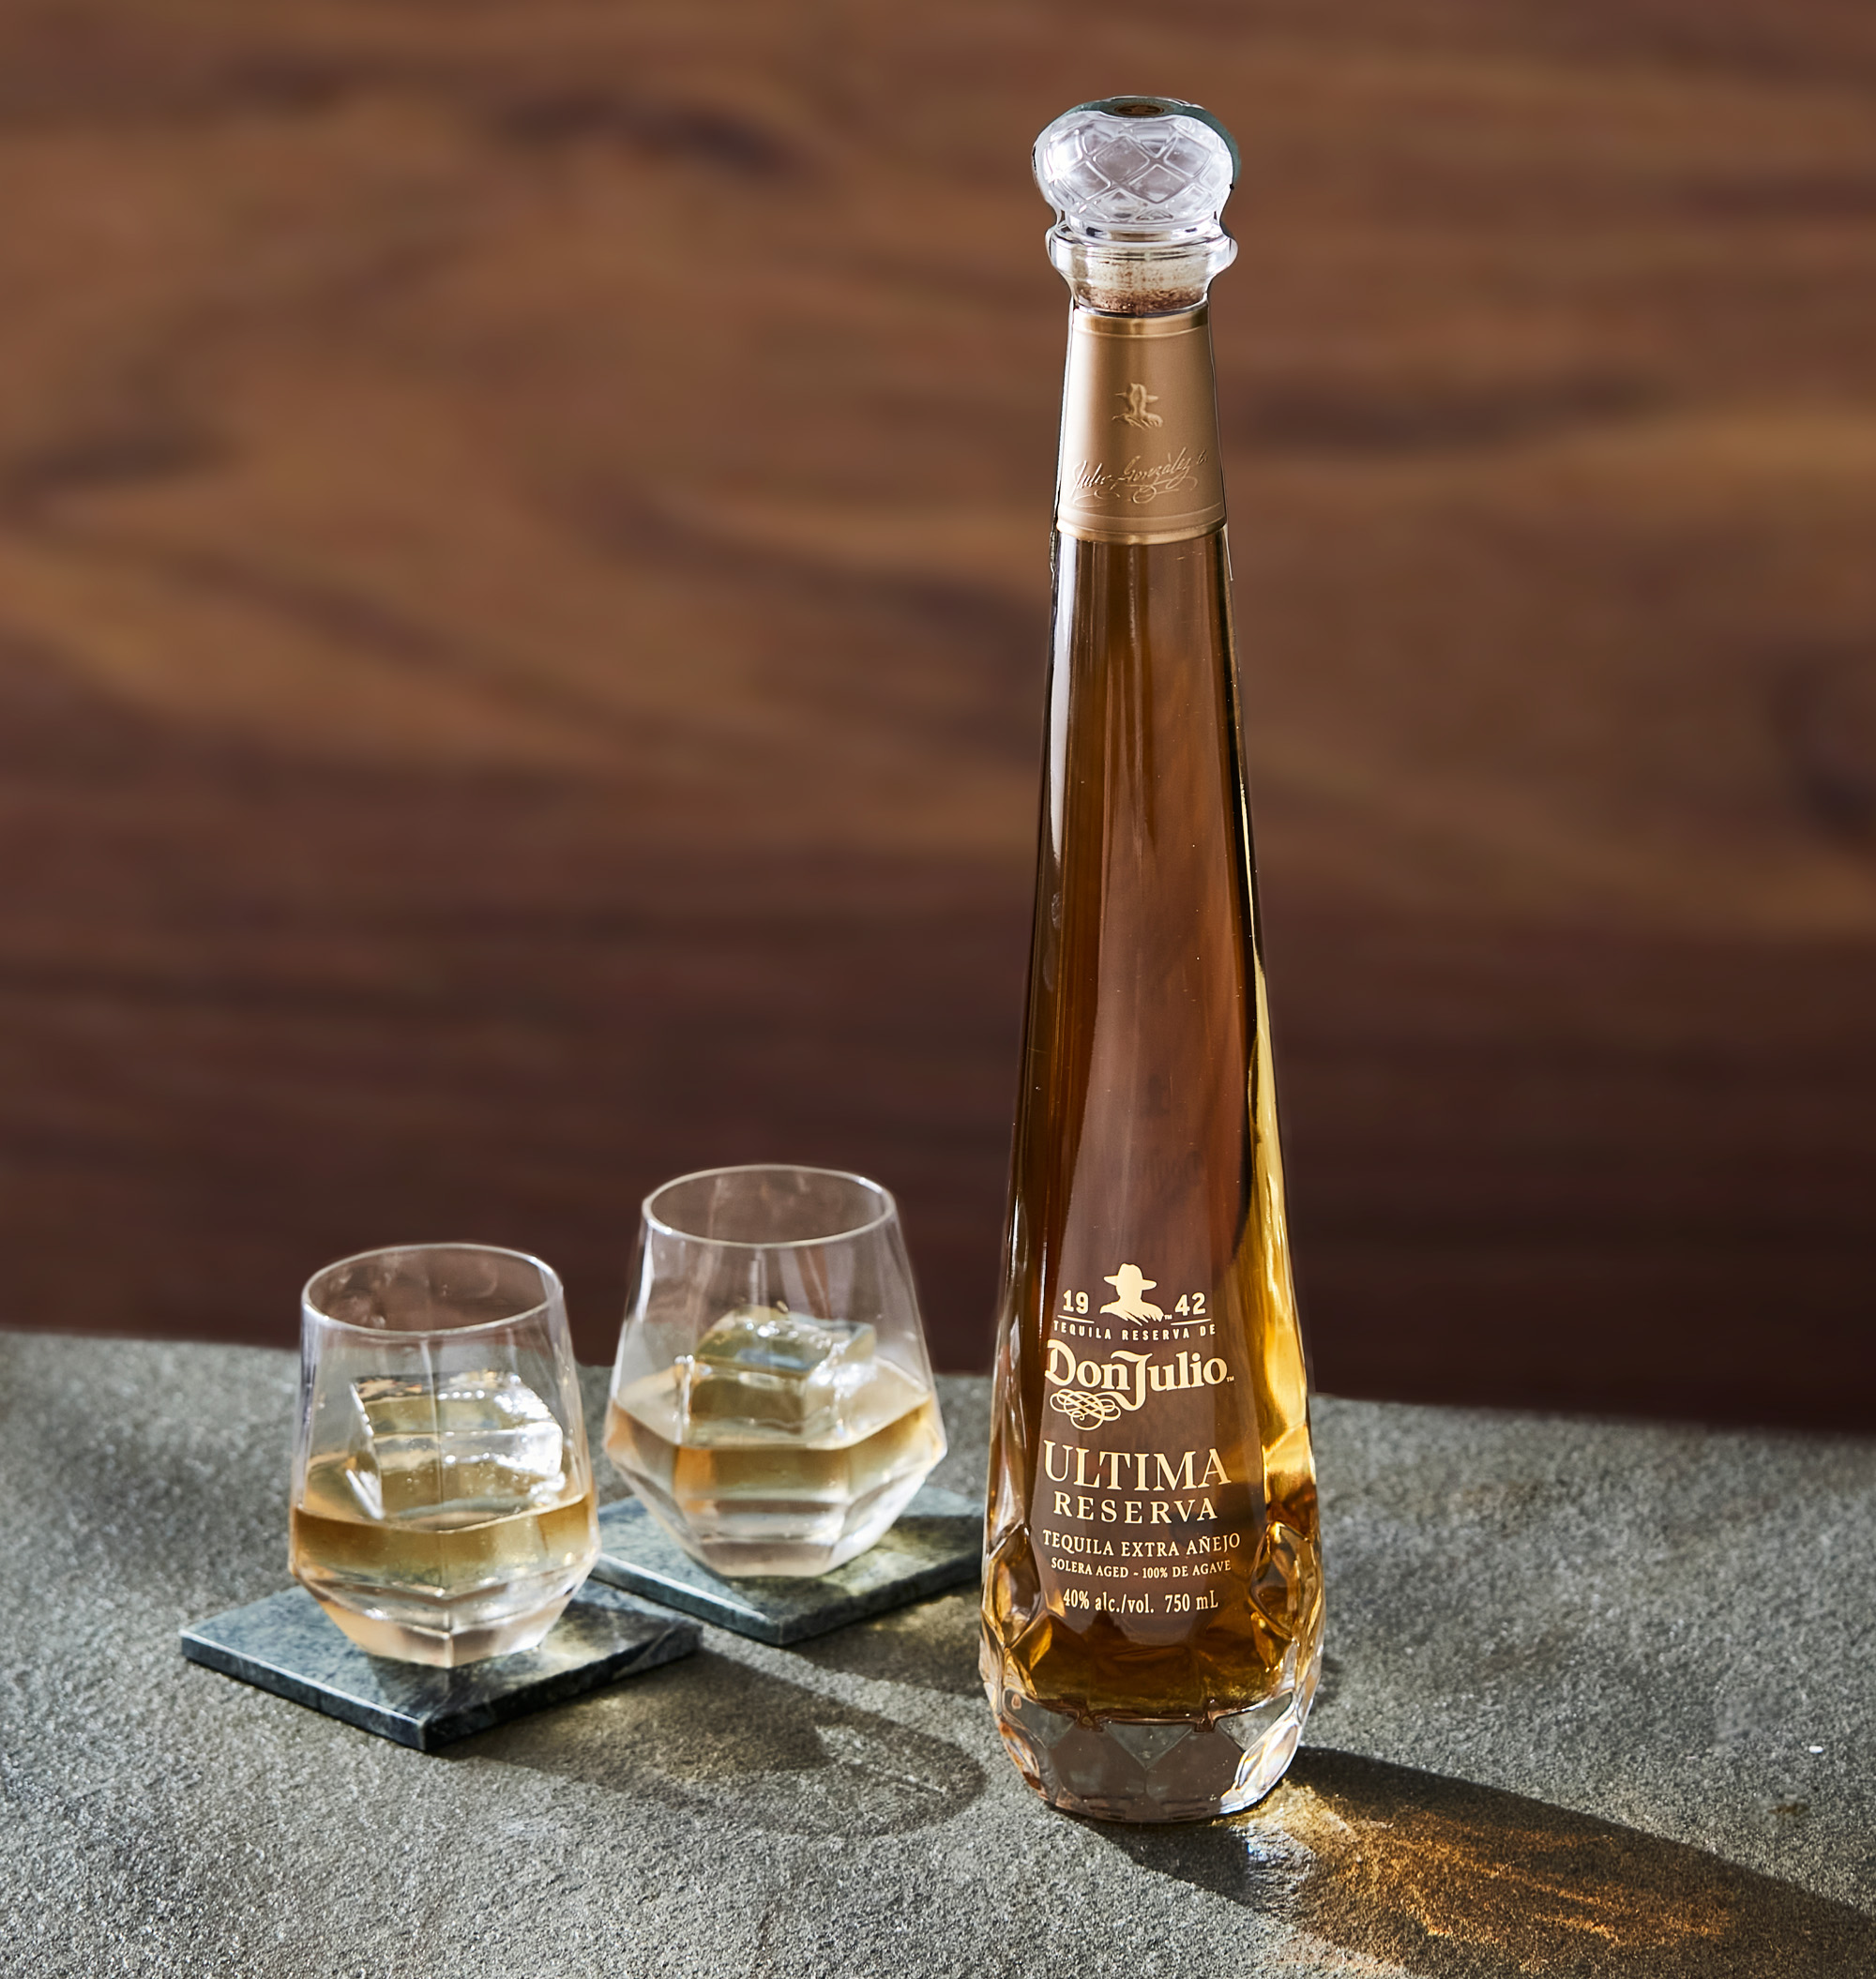 Tequila Don Julio Ultima Reserva is an exceptional liquid beautifully golden in color that begins with a nose of toasted oak and caramel, followed with hints of apricot and orange, and finished with deliciously smooth honeyed agave that is best enjoyed neat.